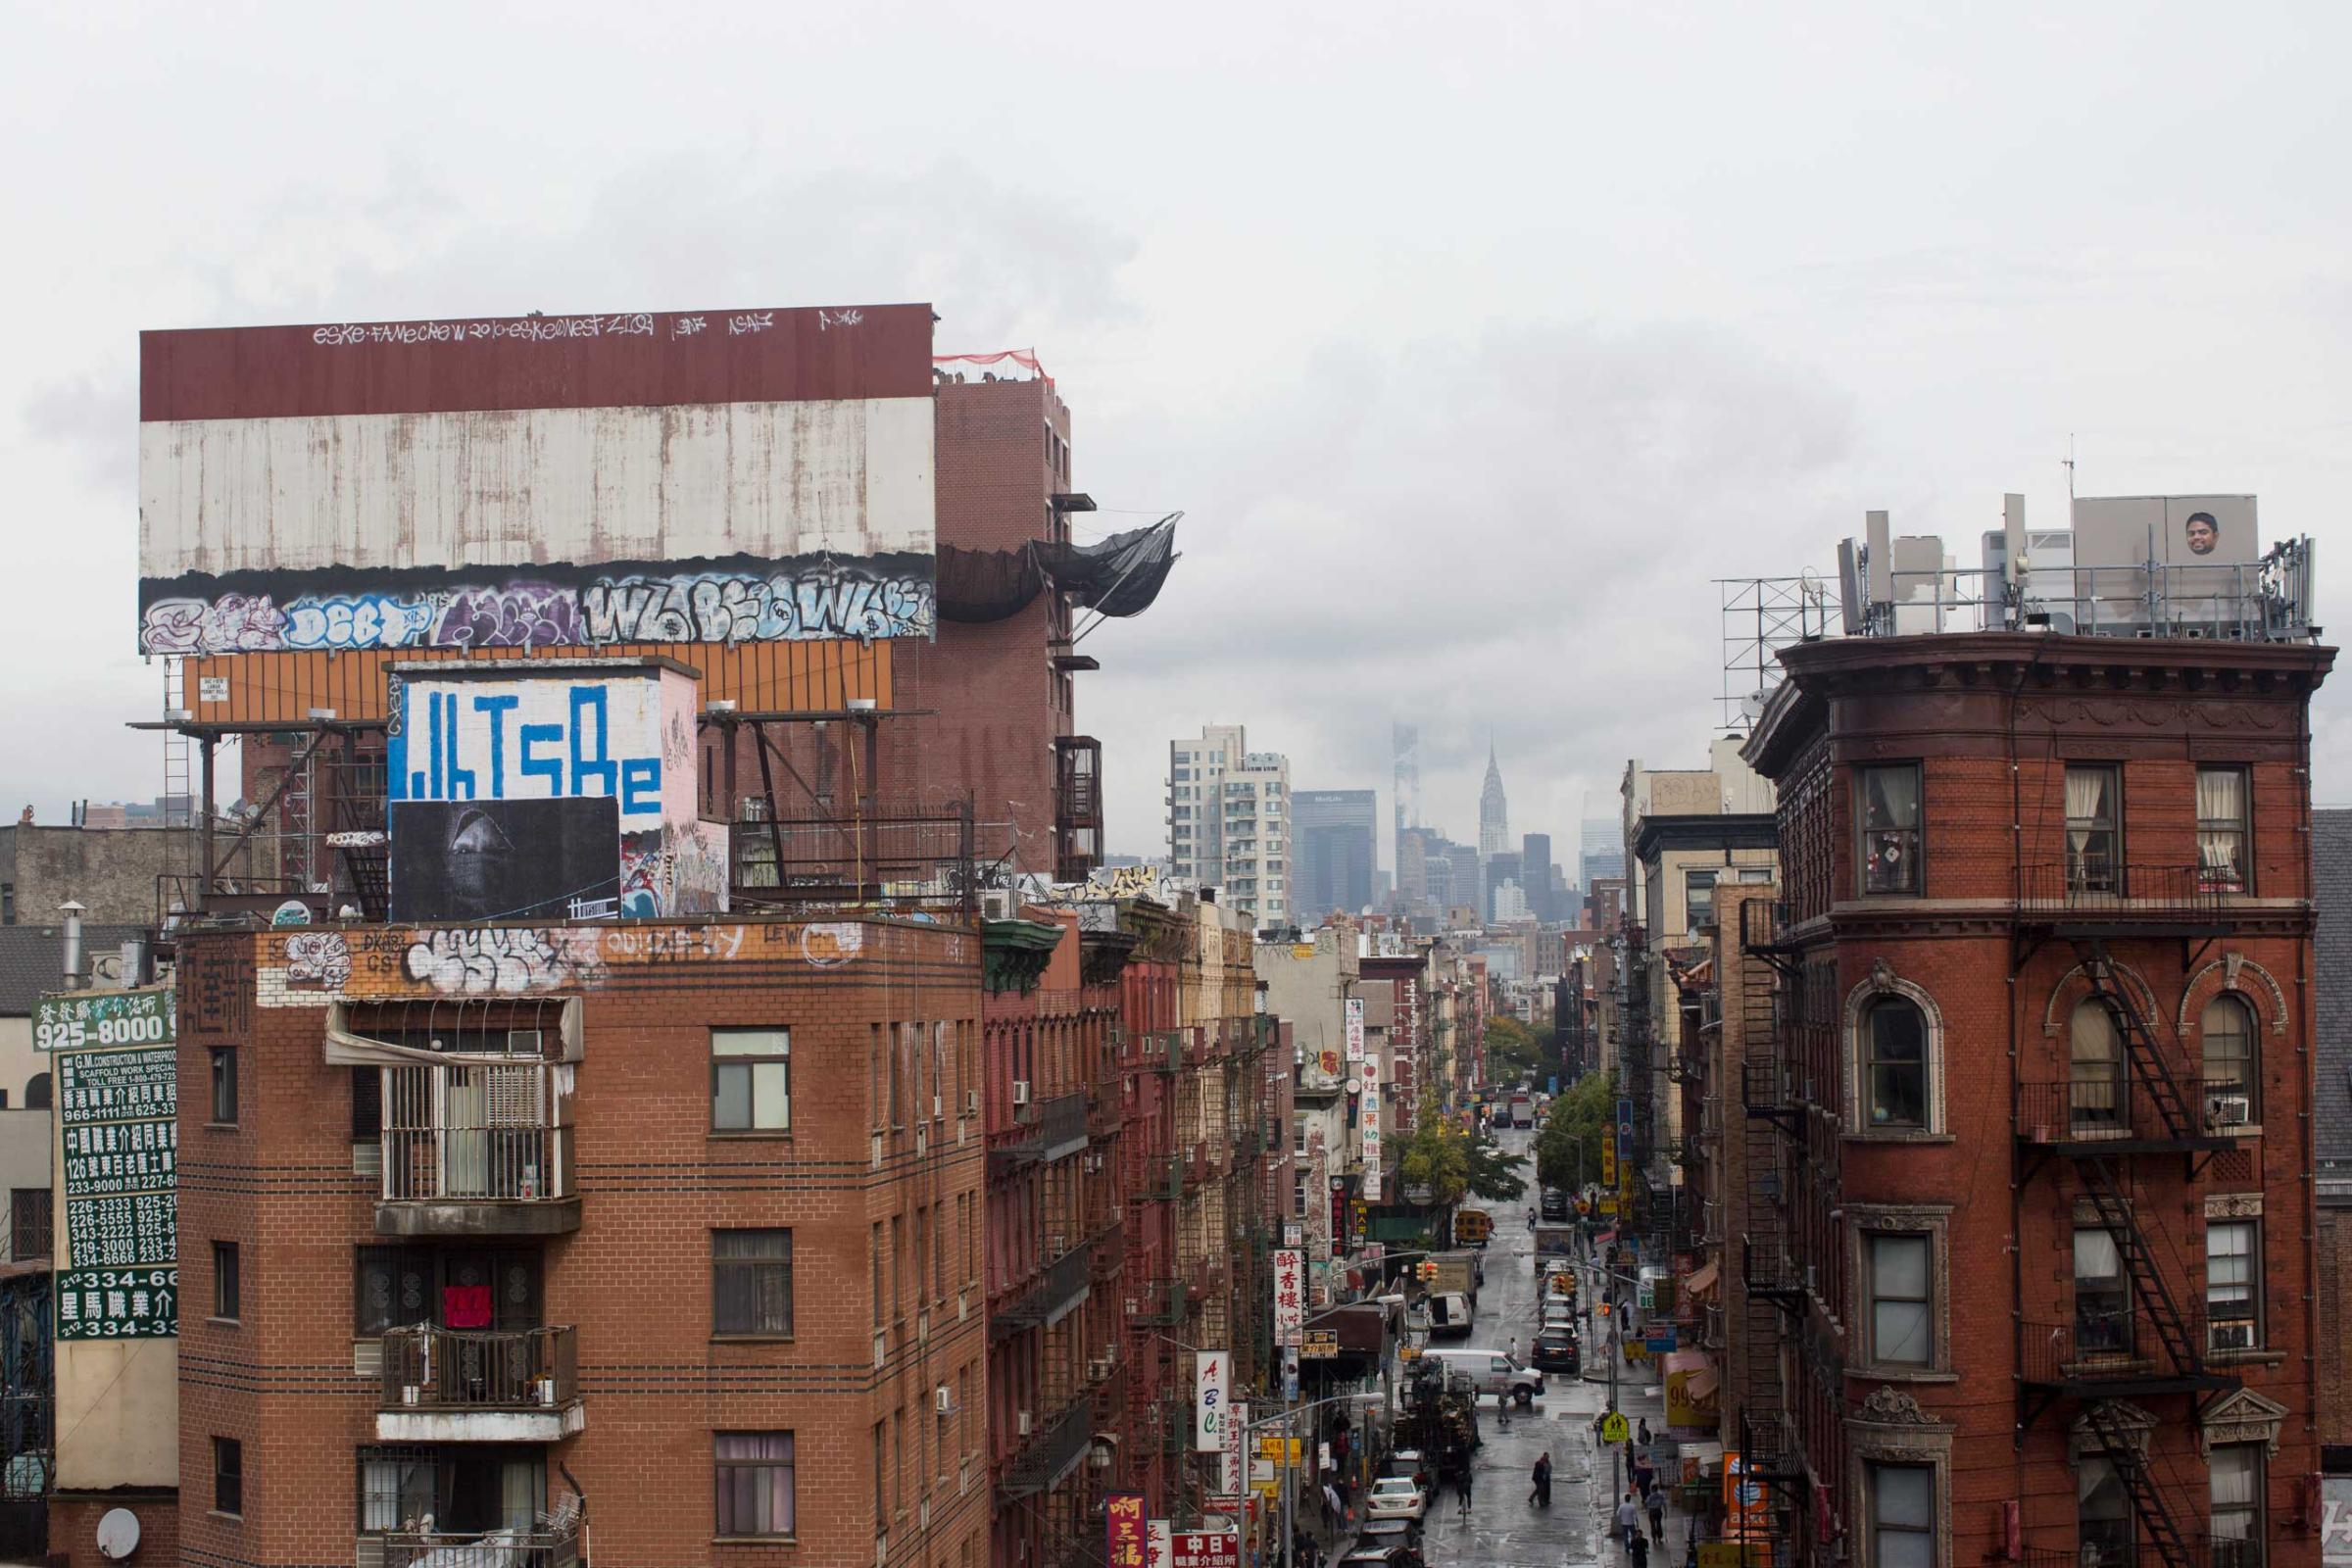 One of Dysturb's photograph on a rooftop in New York (on Division Street in Chinatown). October 16th 2014.